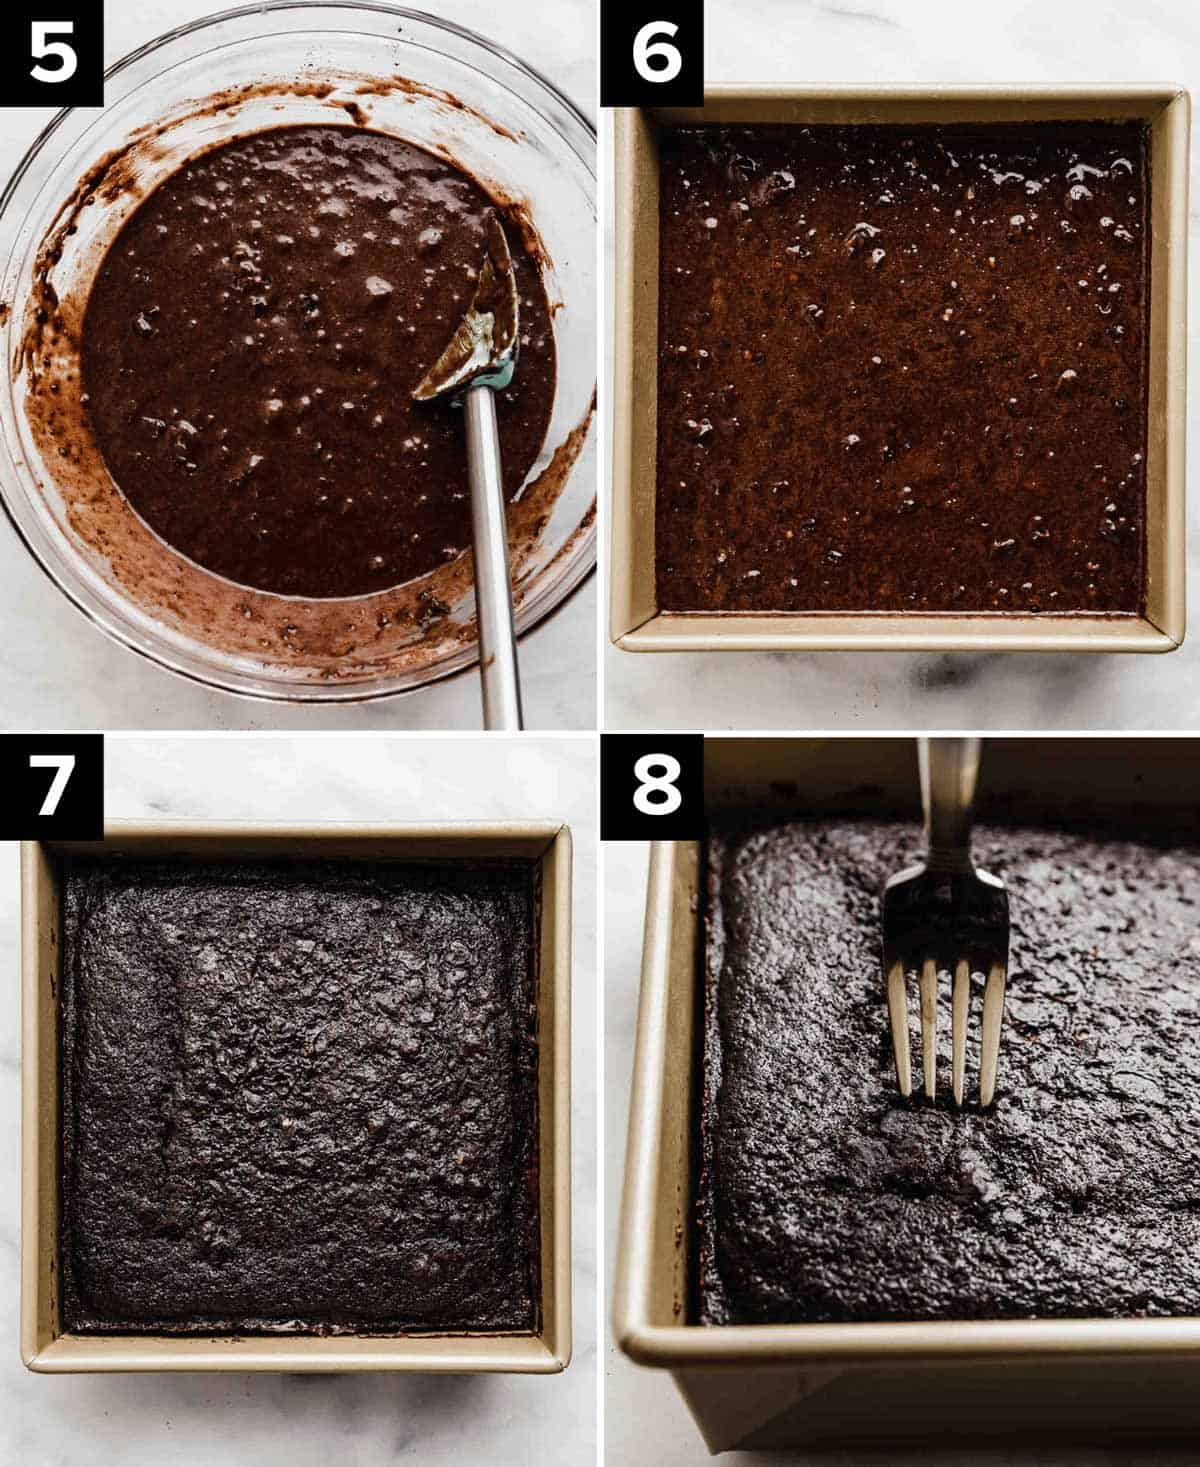 Four images showing how to make Chocolate Tres Leches Cake: top left image is chocolate batter in glass bowl, top right image is square pan filled with brown cake batter, bottom left photo is baked Chocolate Tres Leches Cake in square pan, bottom right photo is a fork piercing into a Chocolate Tres Leches Cake.